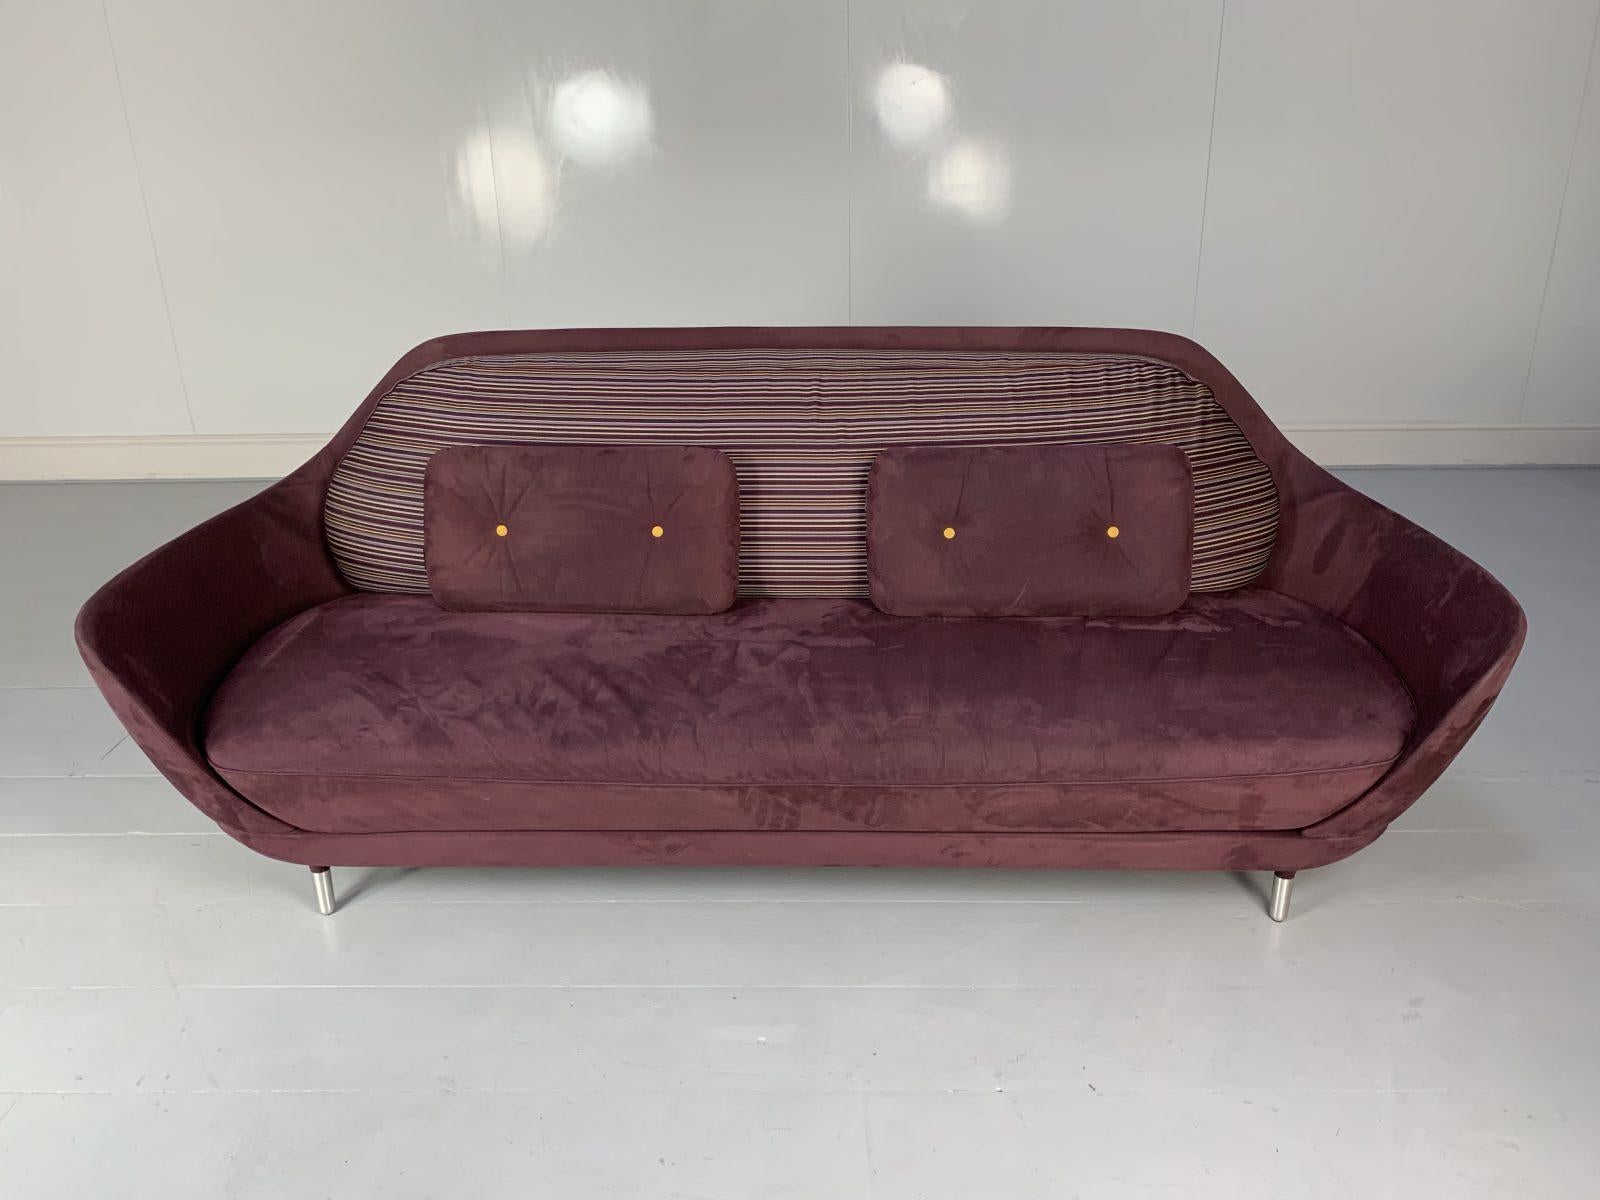 Hello Friends, and welcome to another unmissable offering from Lord Browns Furniture, the UK’s premier resource for fine Sofas and Chairs.

On offer on this occasion is a rare example of the iconic “Favn JH3” Sofa, from the world renown Danish